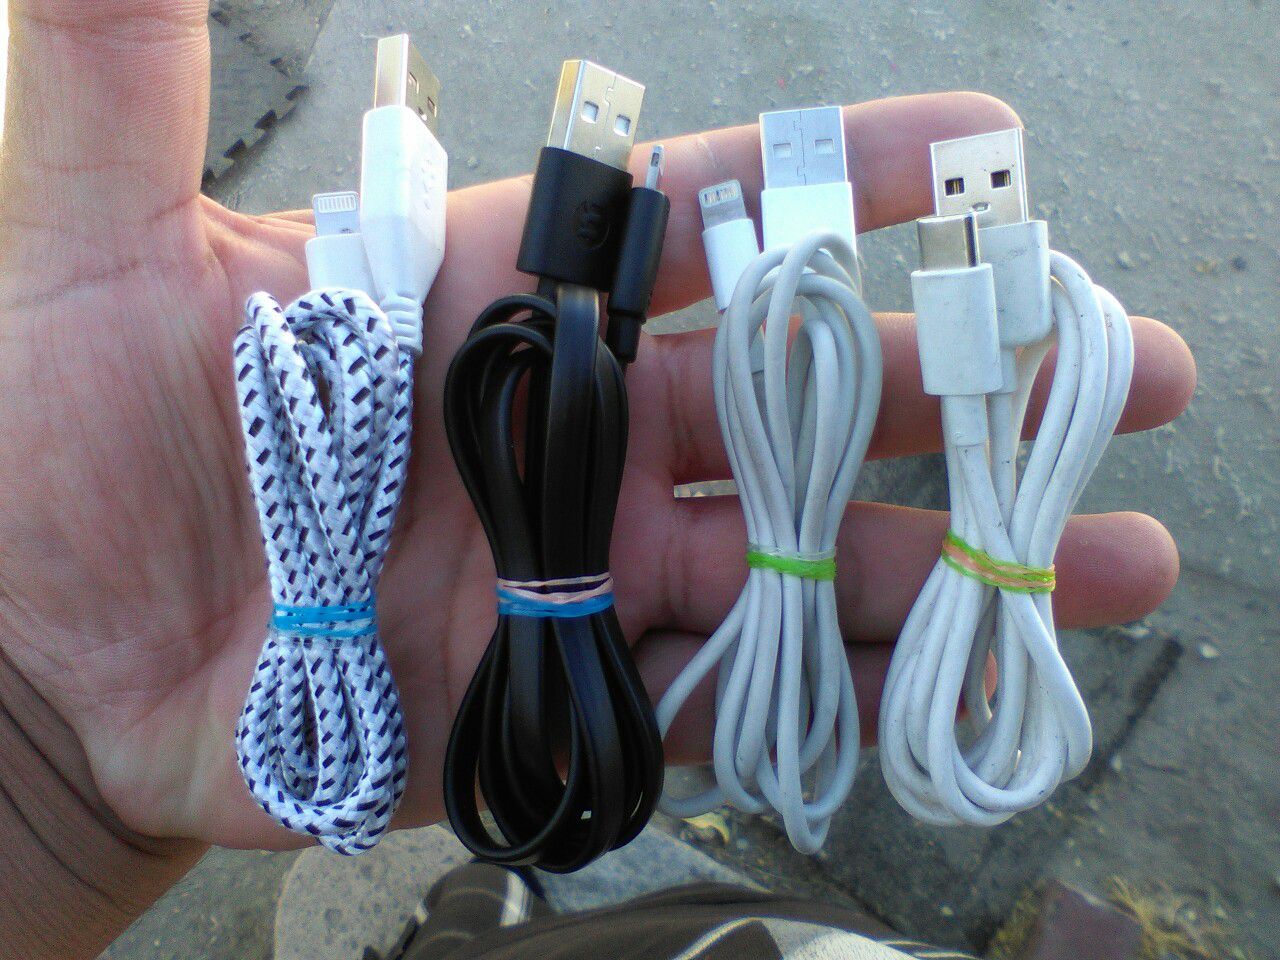 iPhones chargers $3 each